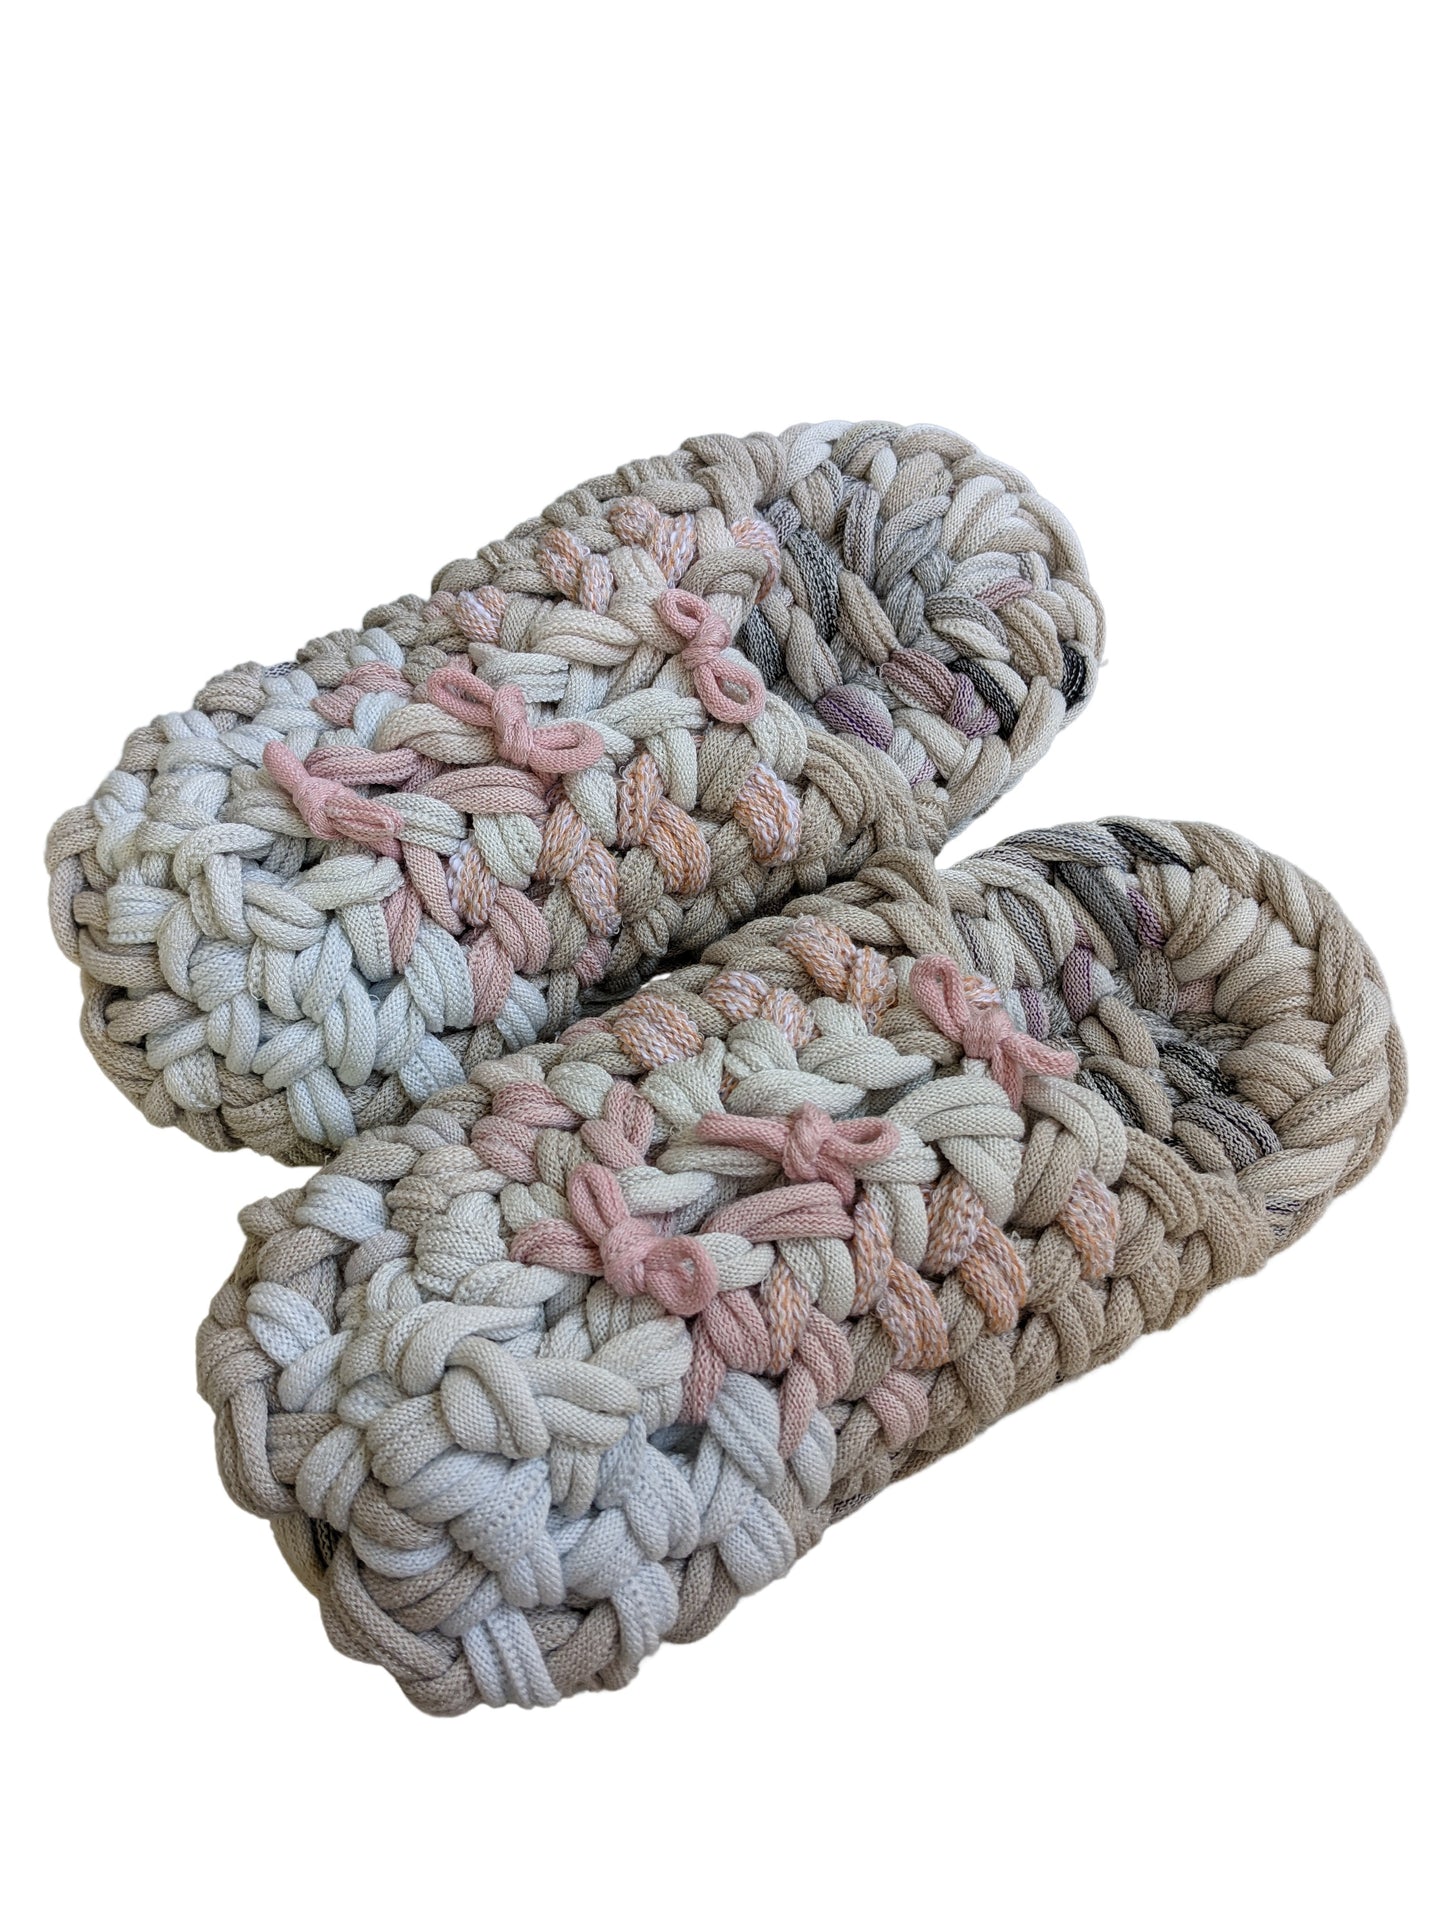 Large | Knit upcycle slippers 2021-L27 [Large]